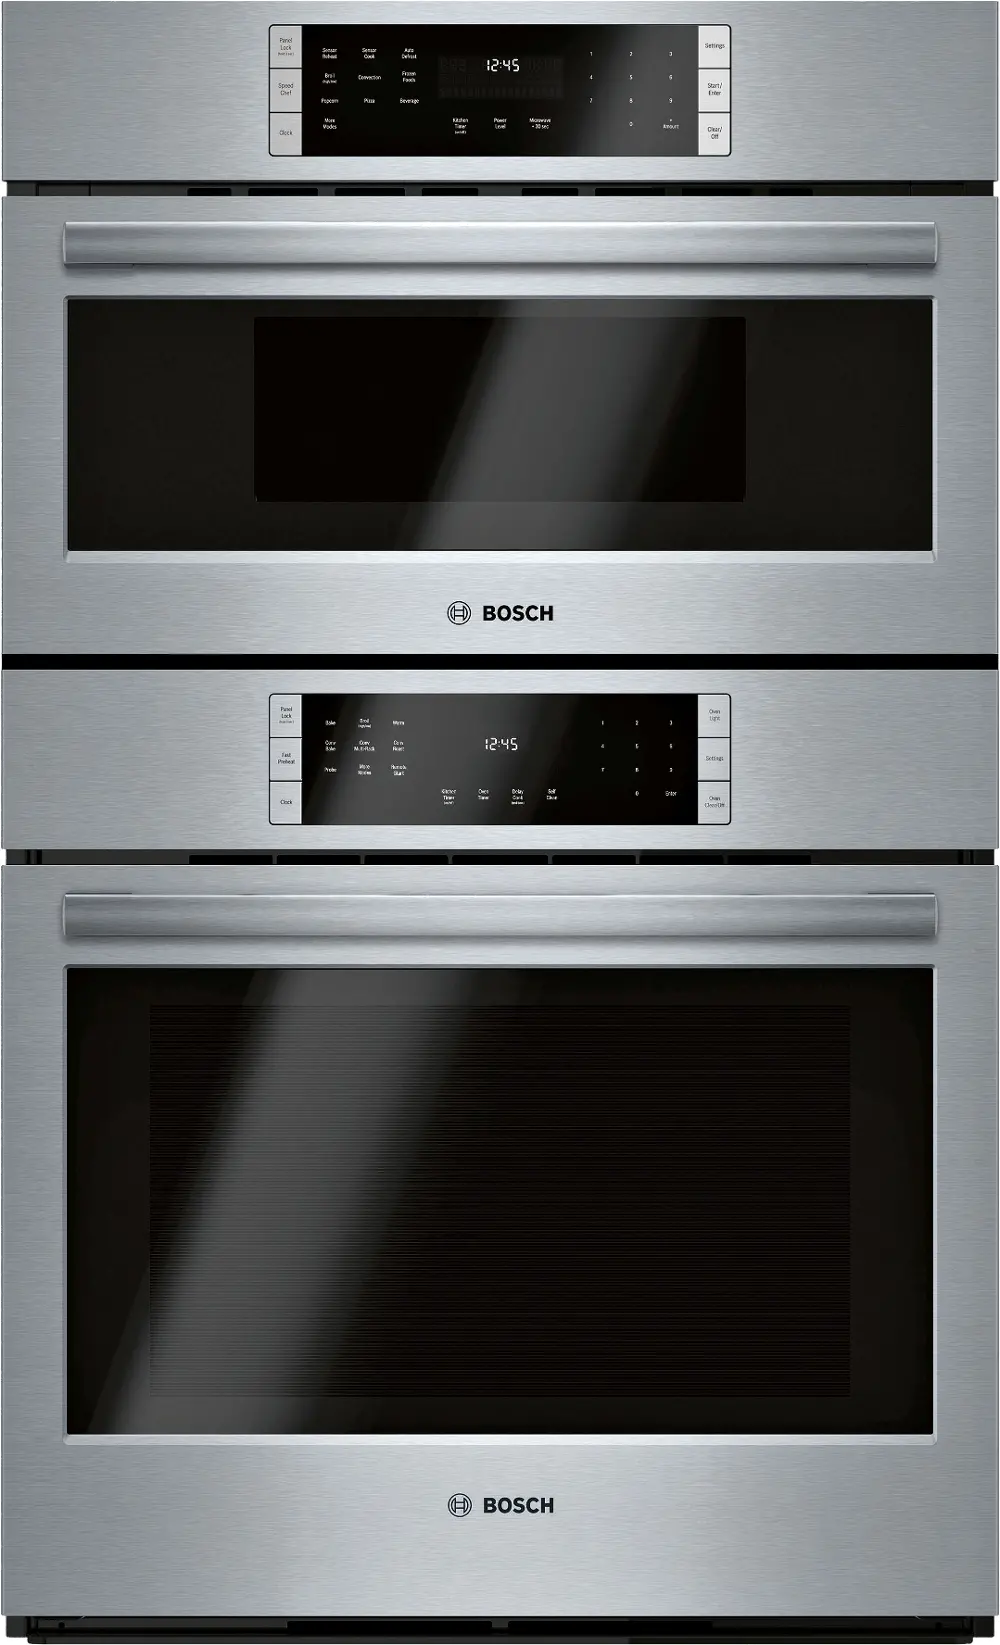 HBL8753UC Bosch 800 Series 6.2 cu ft Speed Combination Wall Oven - Stainless Steel 30 Inch-1